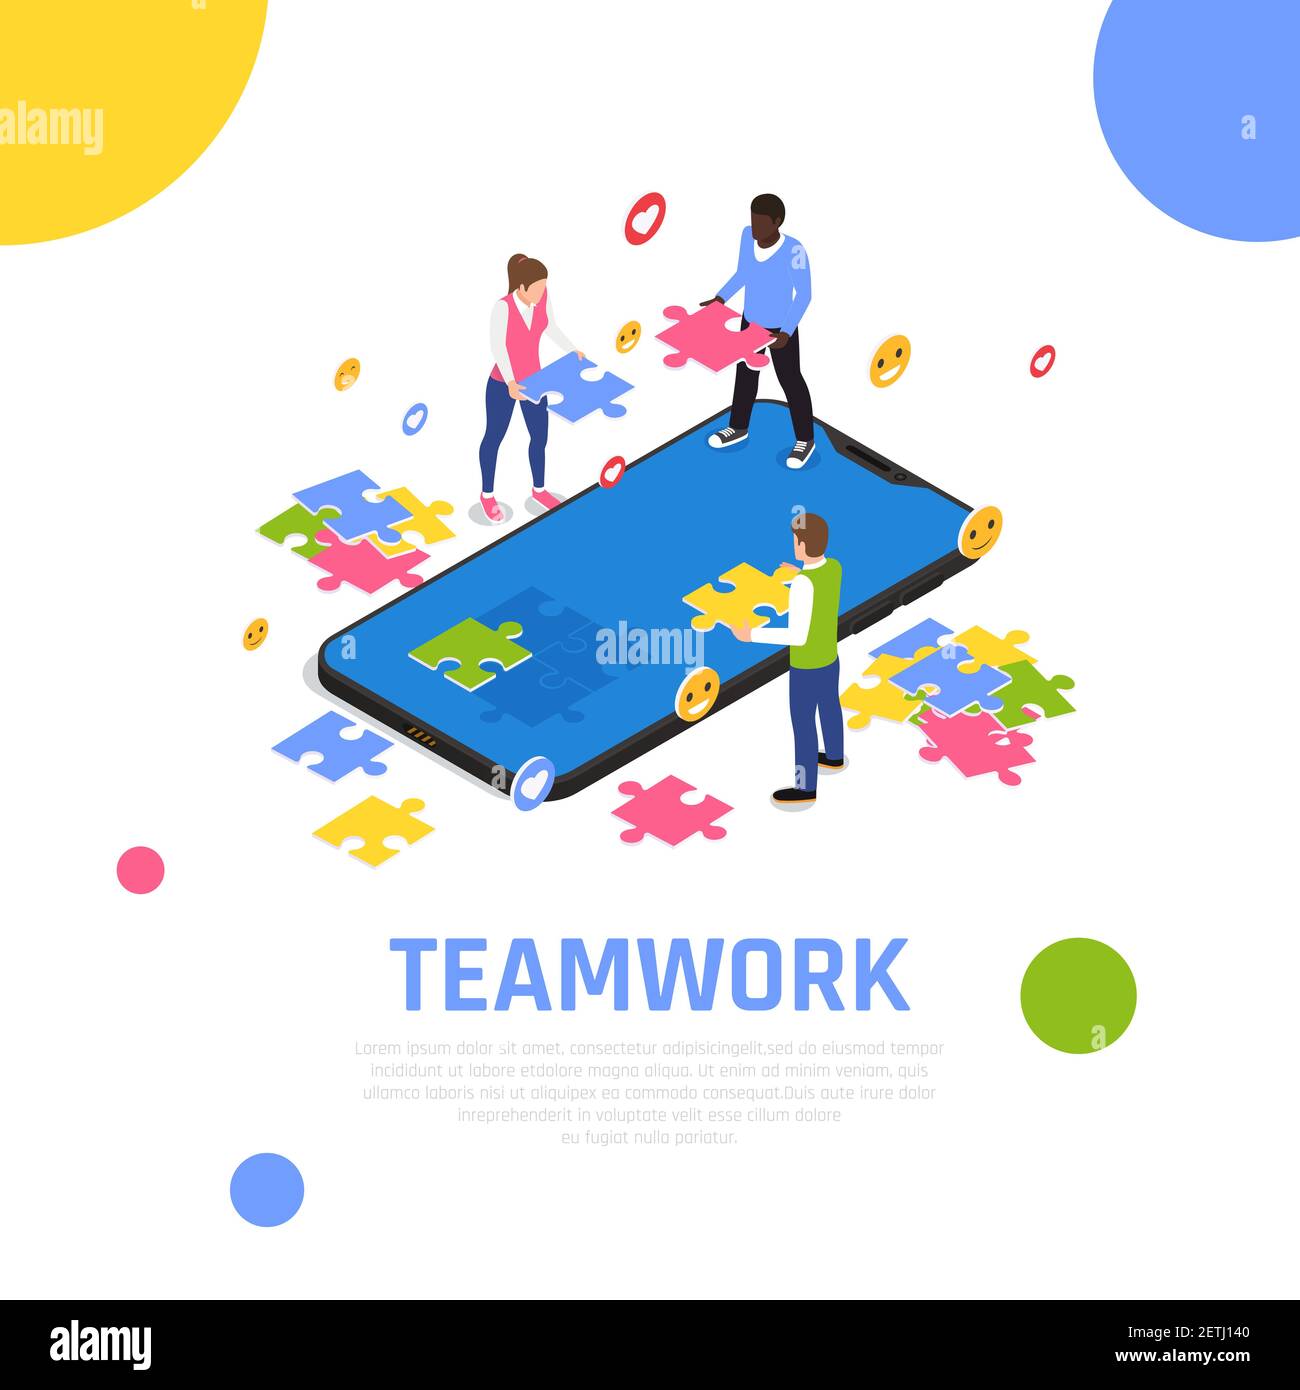 Team Building Great Jigsaw Puzzle Team Stock Illustration